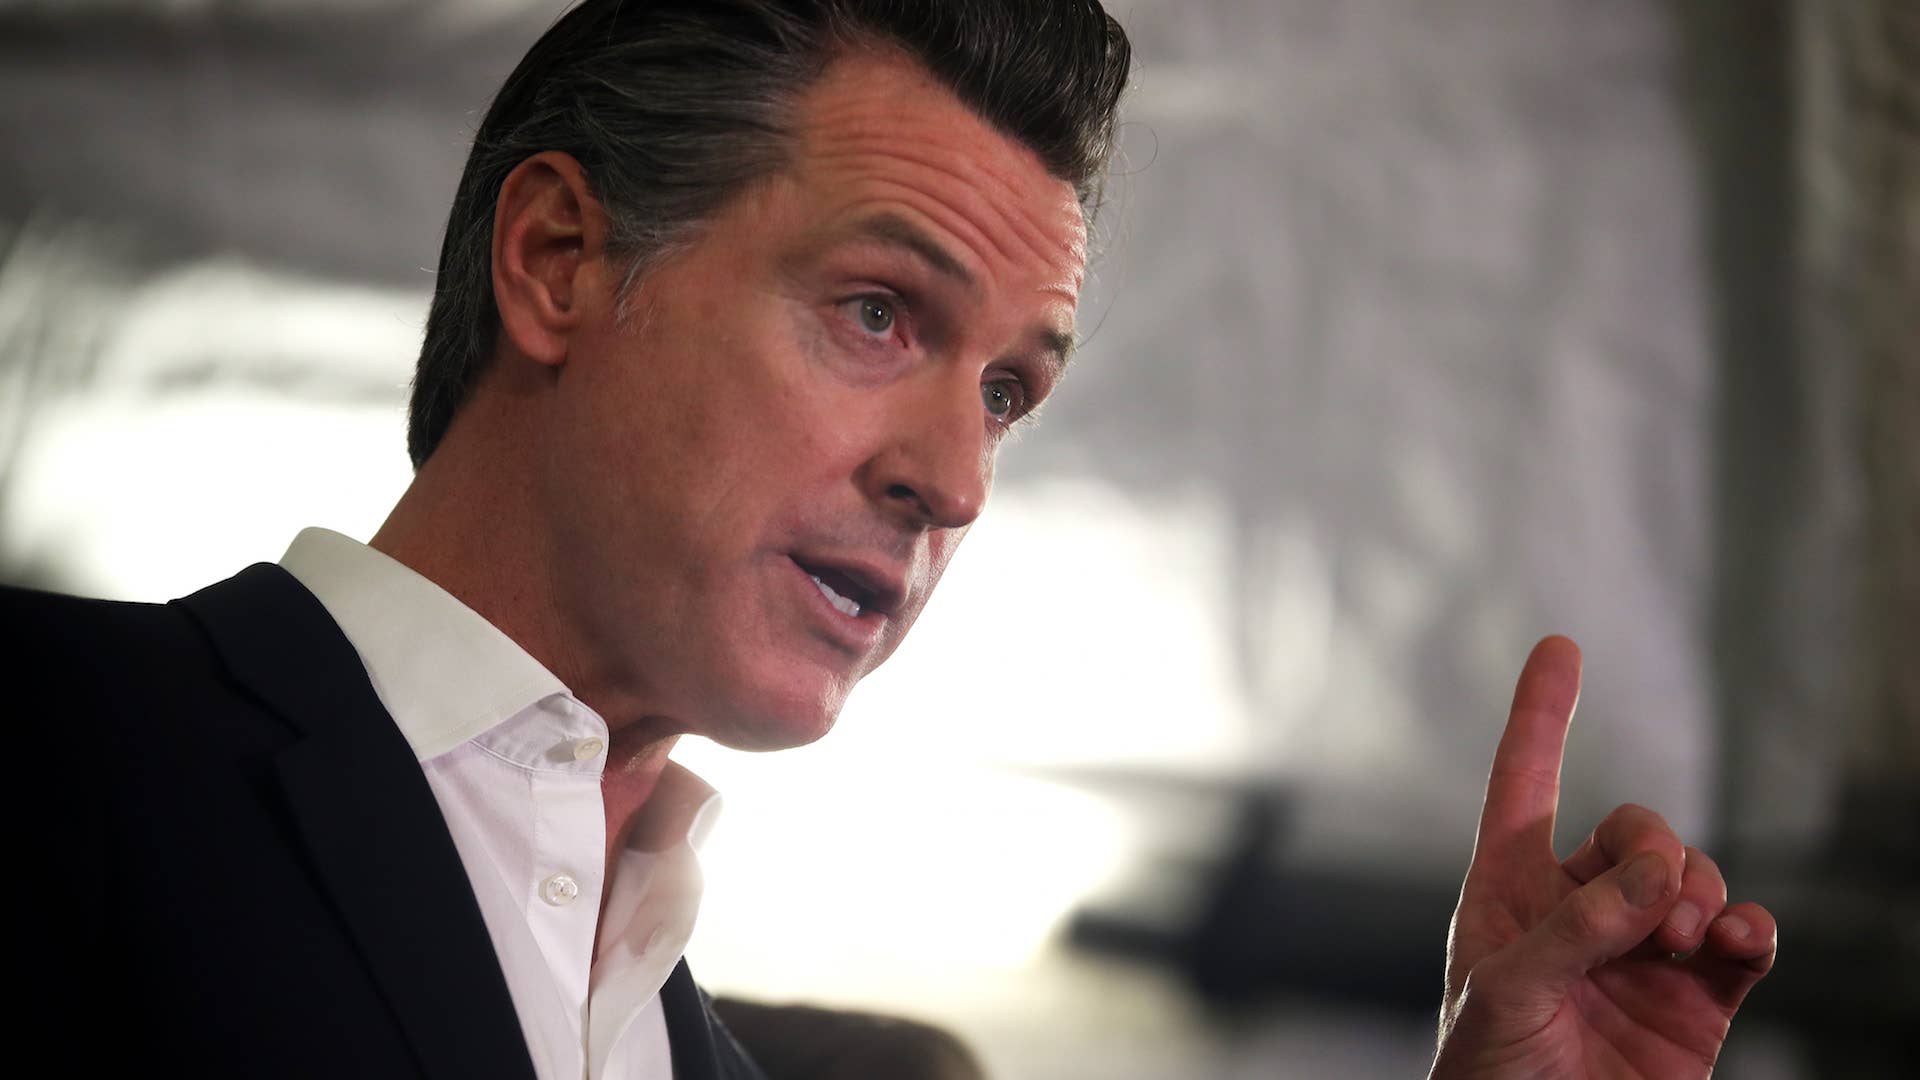 Gavin Newsom speaks during news conference about state's efforts on homelessness crisis.